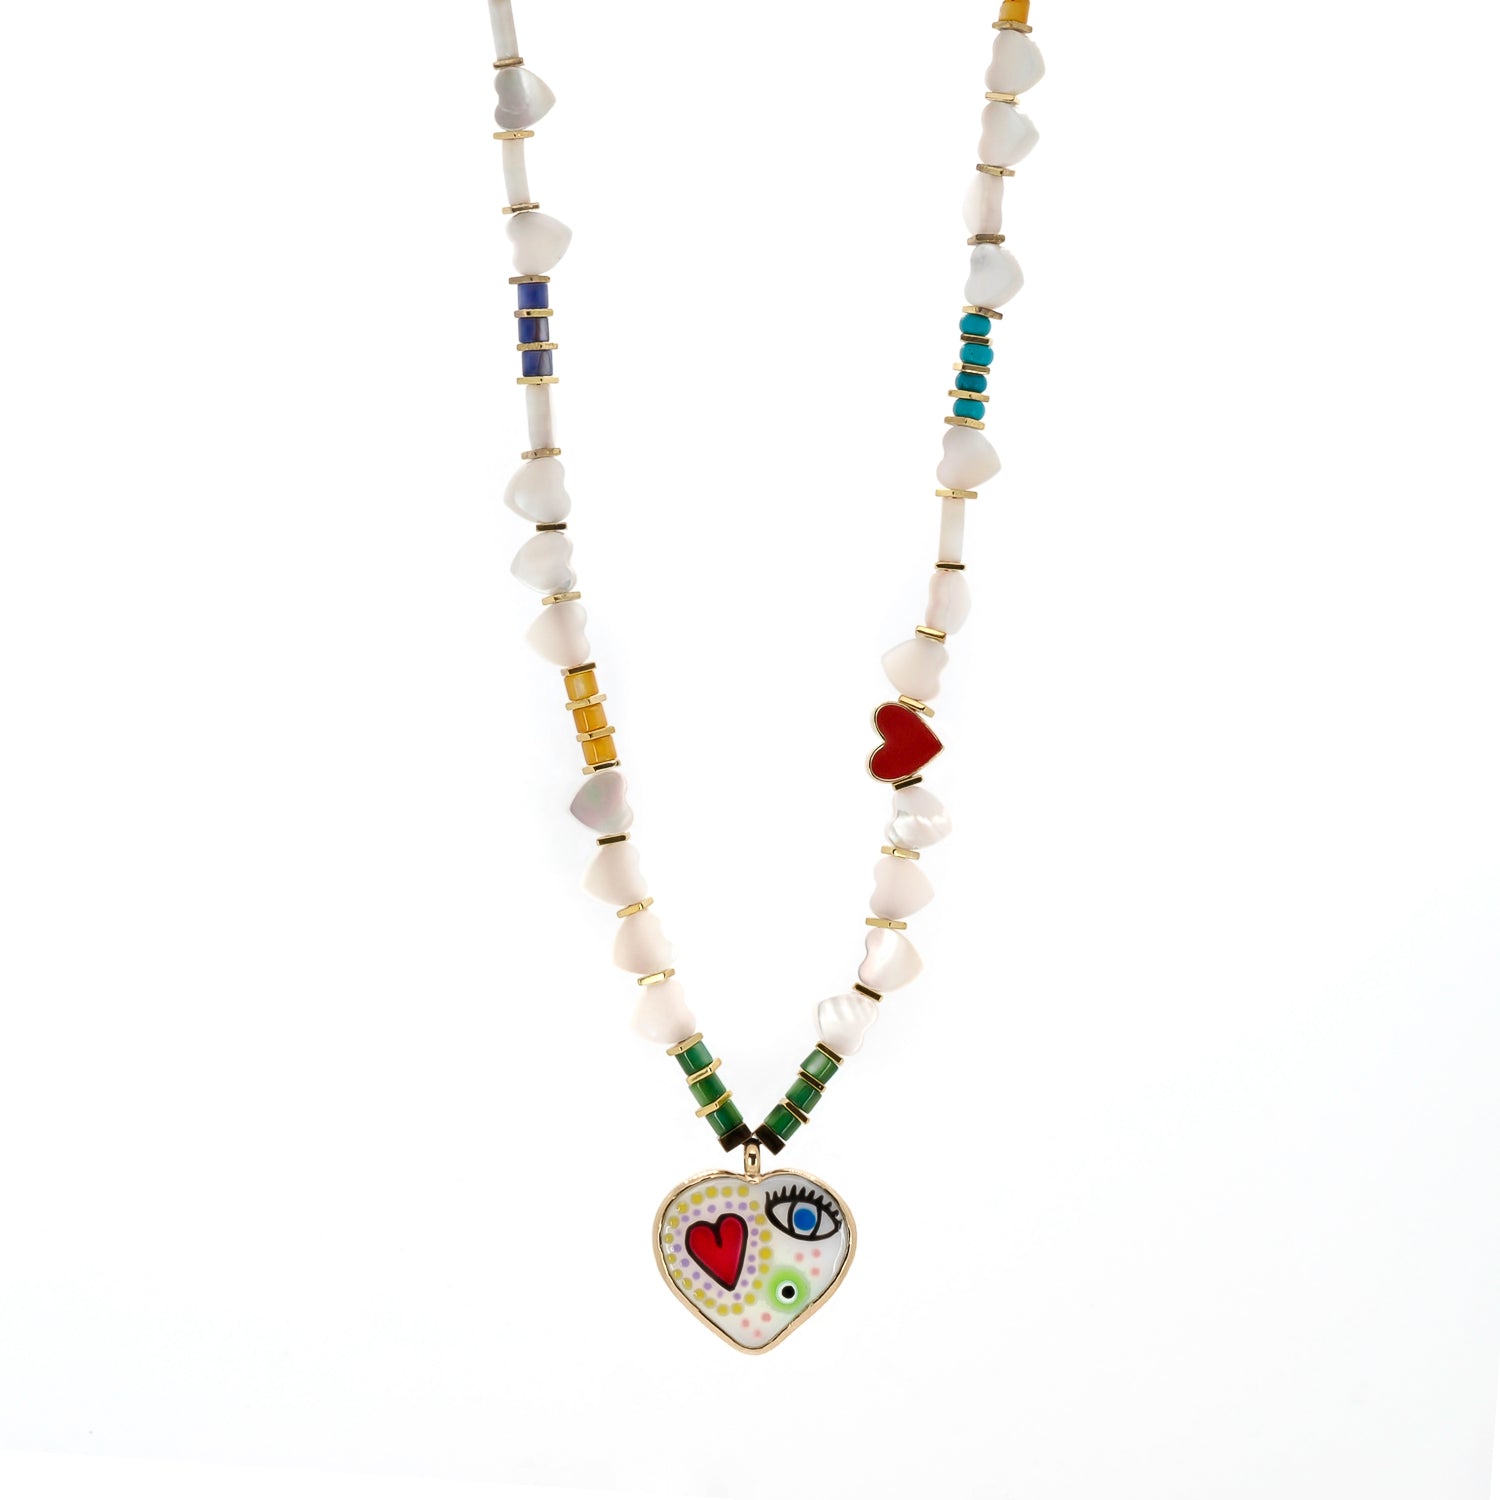 Pearl Heart Beaded Necklace with Red Heart & Evil Eye Pendant